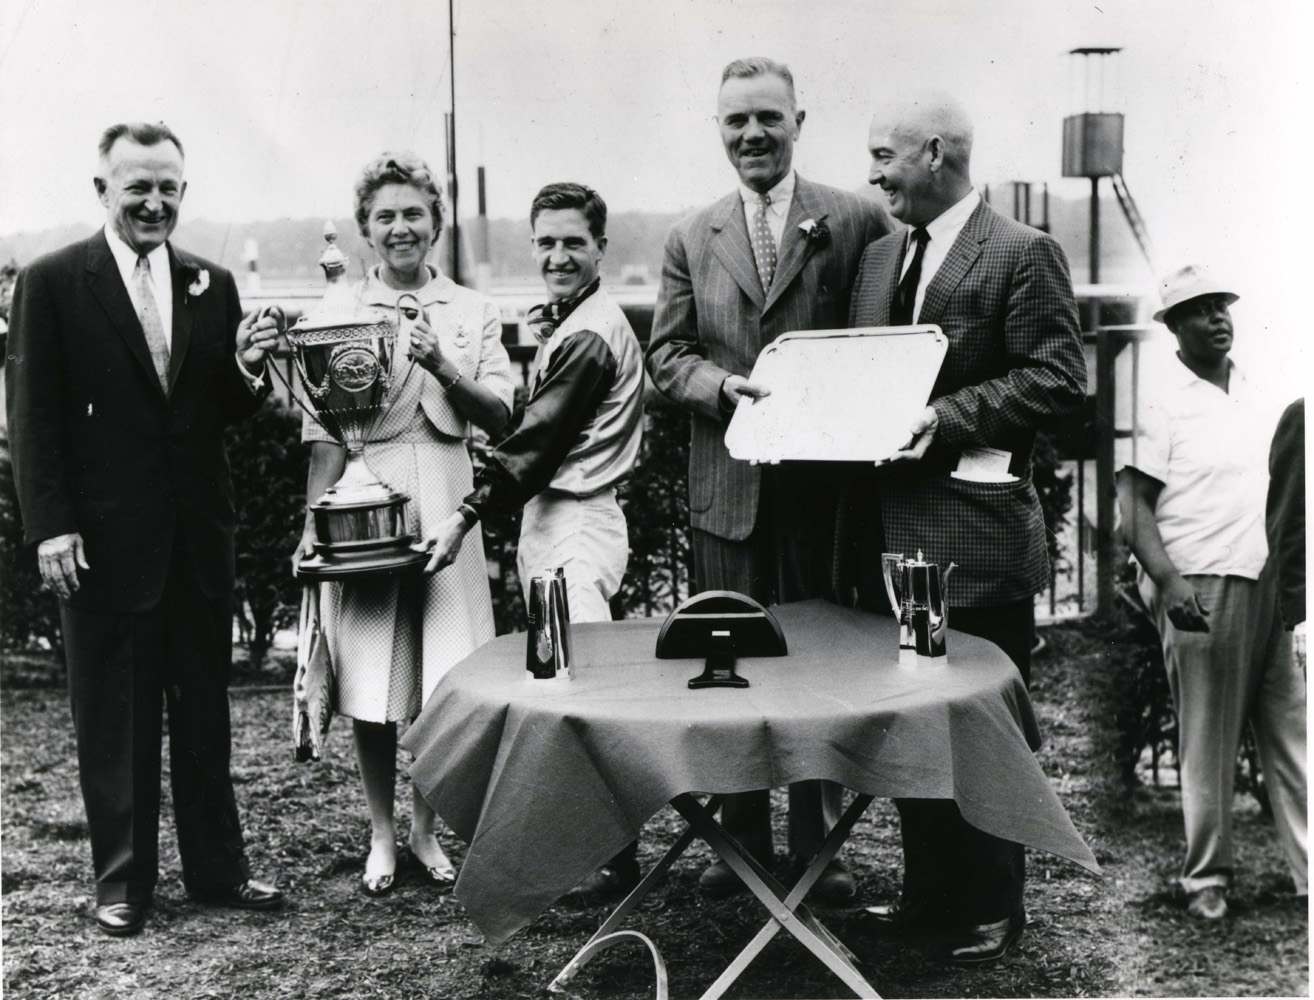 Jockey Bobby Ussery at a trophy presentation after winning a race (Mike Sirico/Museum Collection)